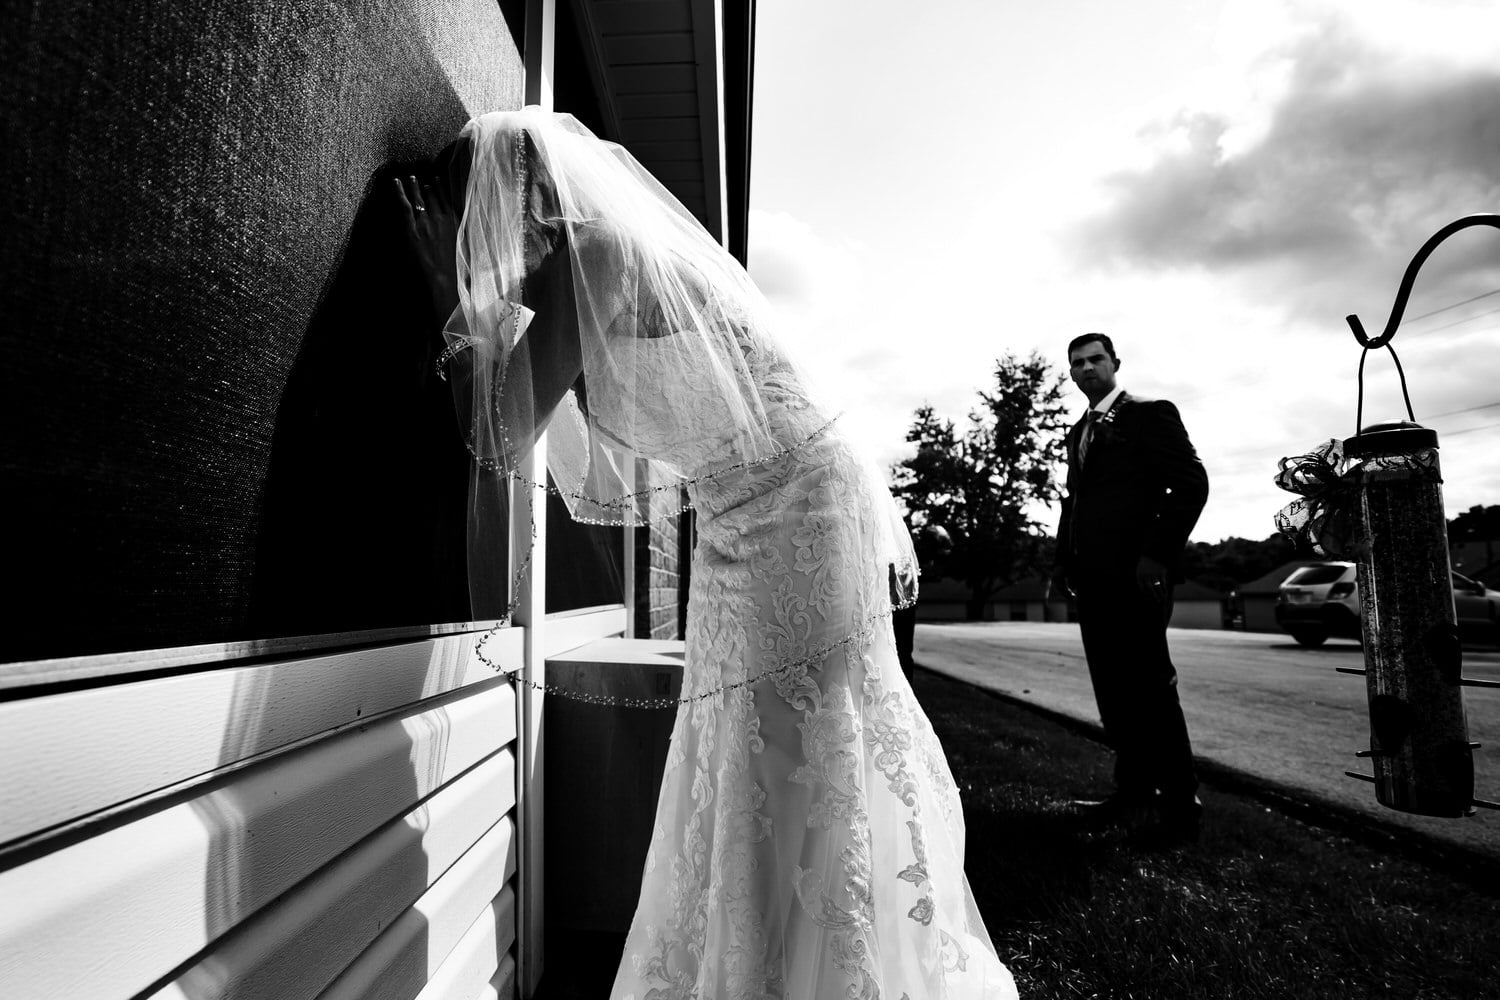 A candid black and white picture of a bride peeking into a window of a building. 